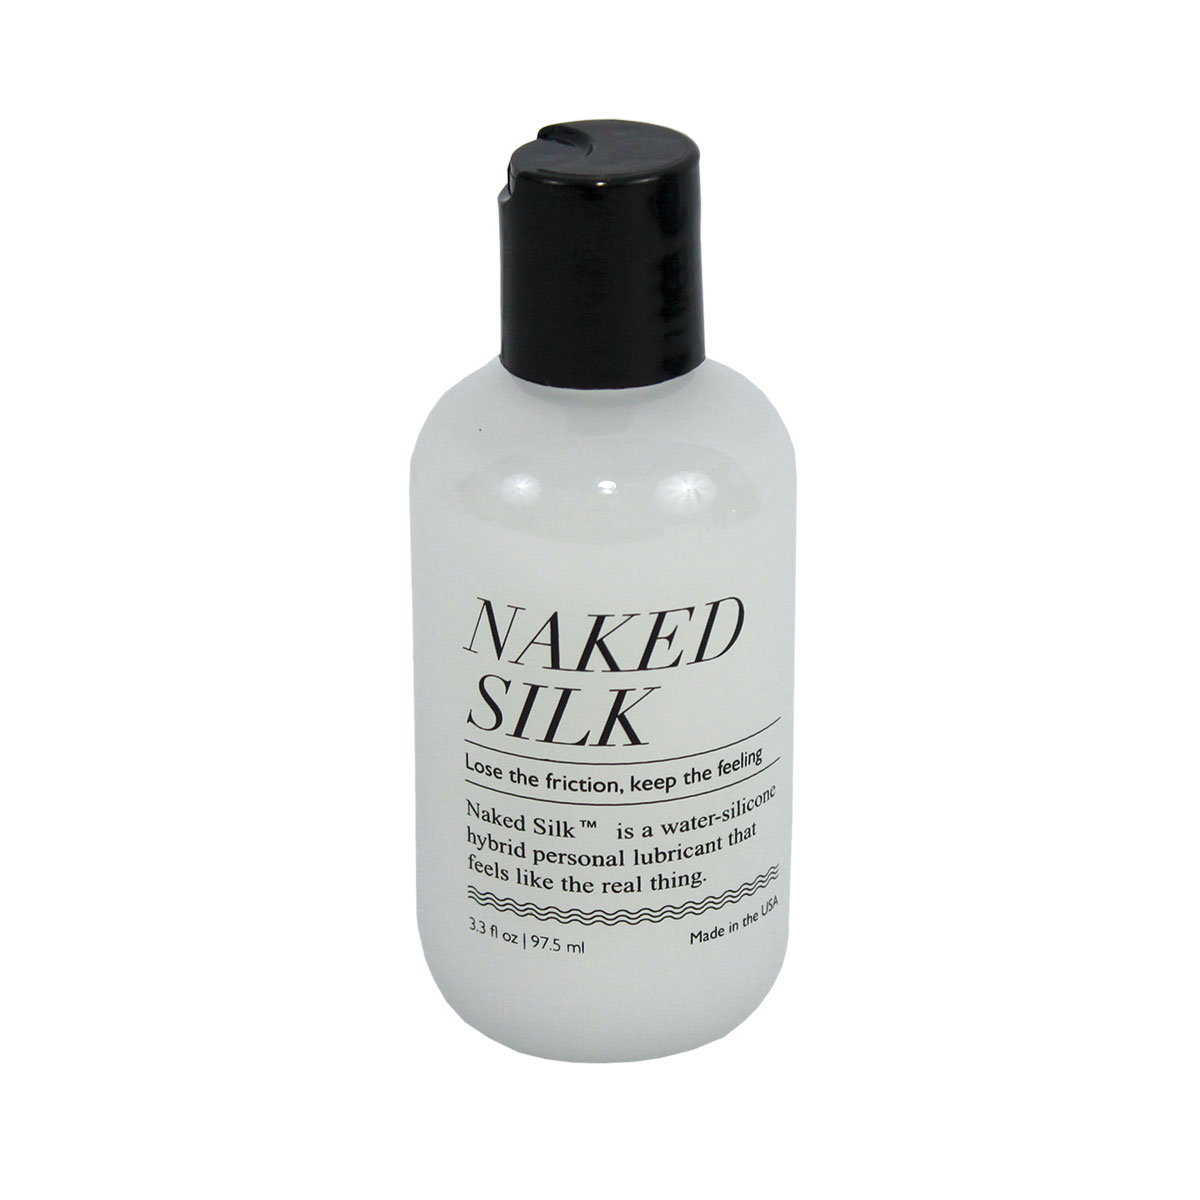 Naked Silk is a water-silicone hybrid personal lubricant that feels like th...